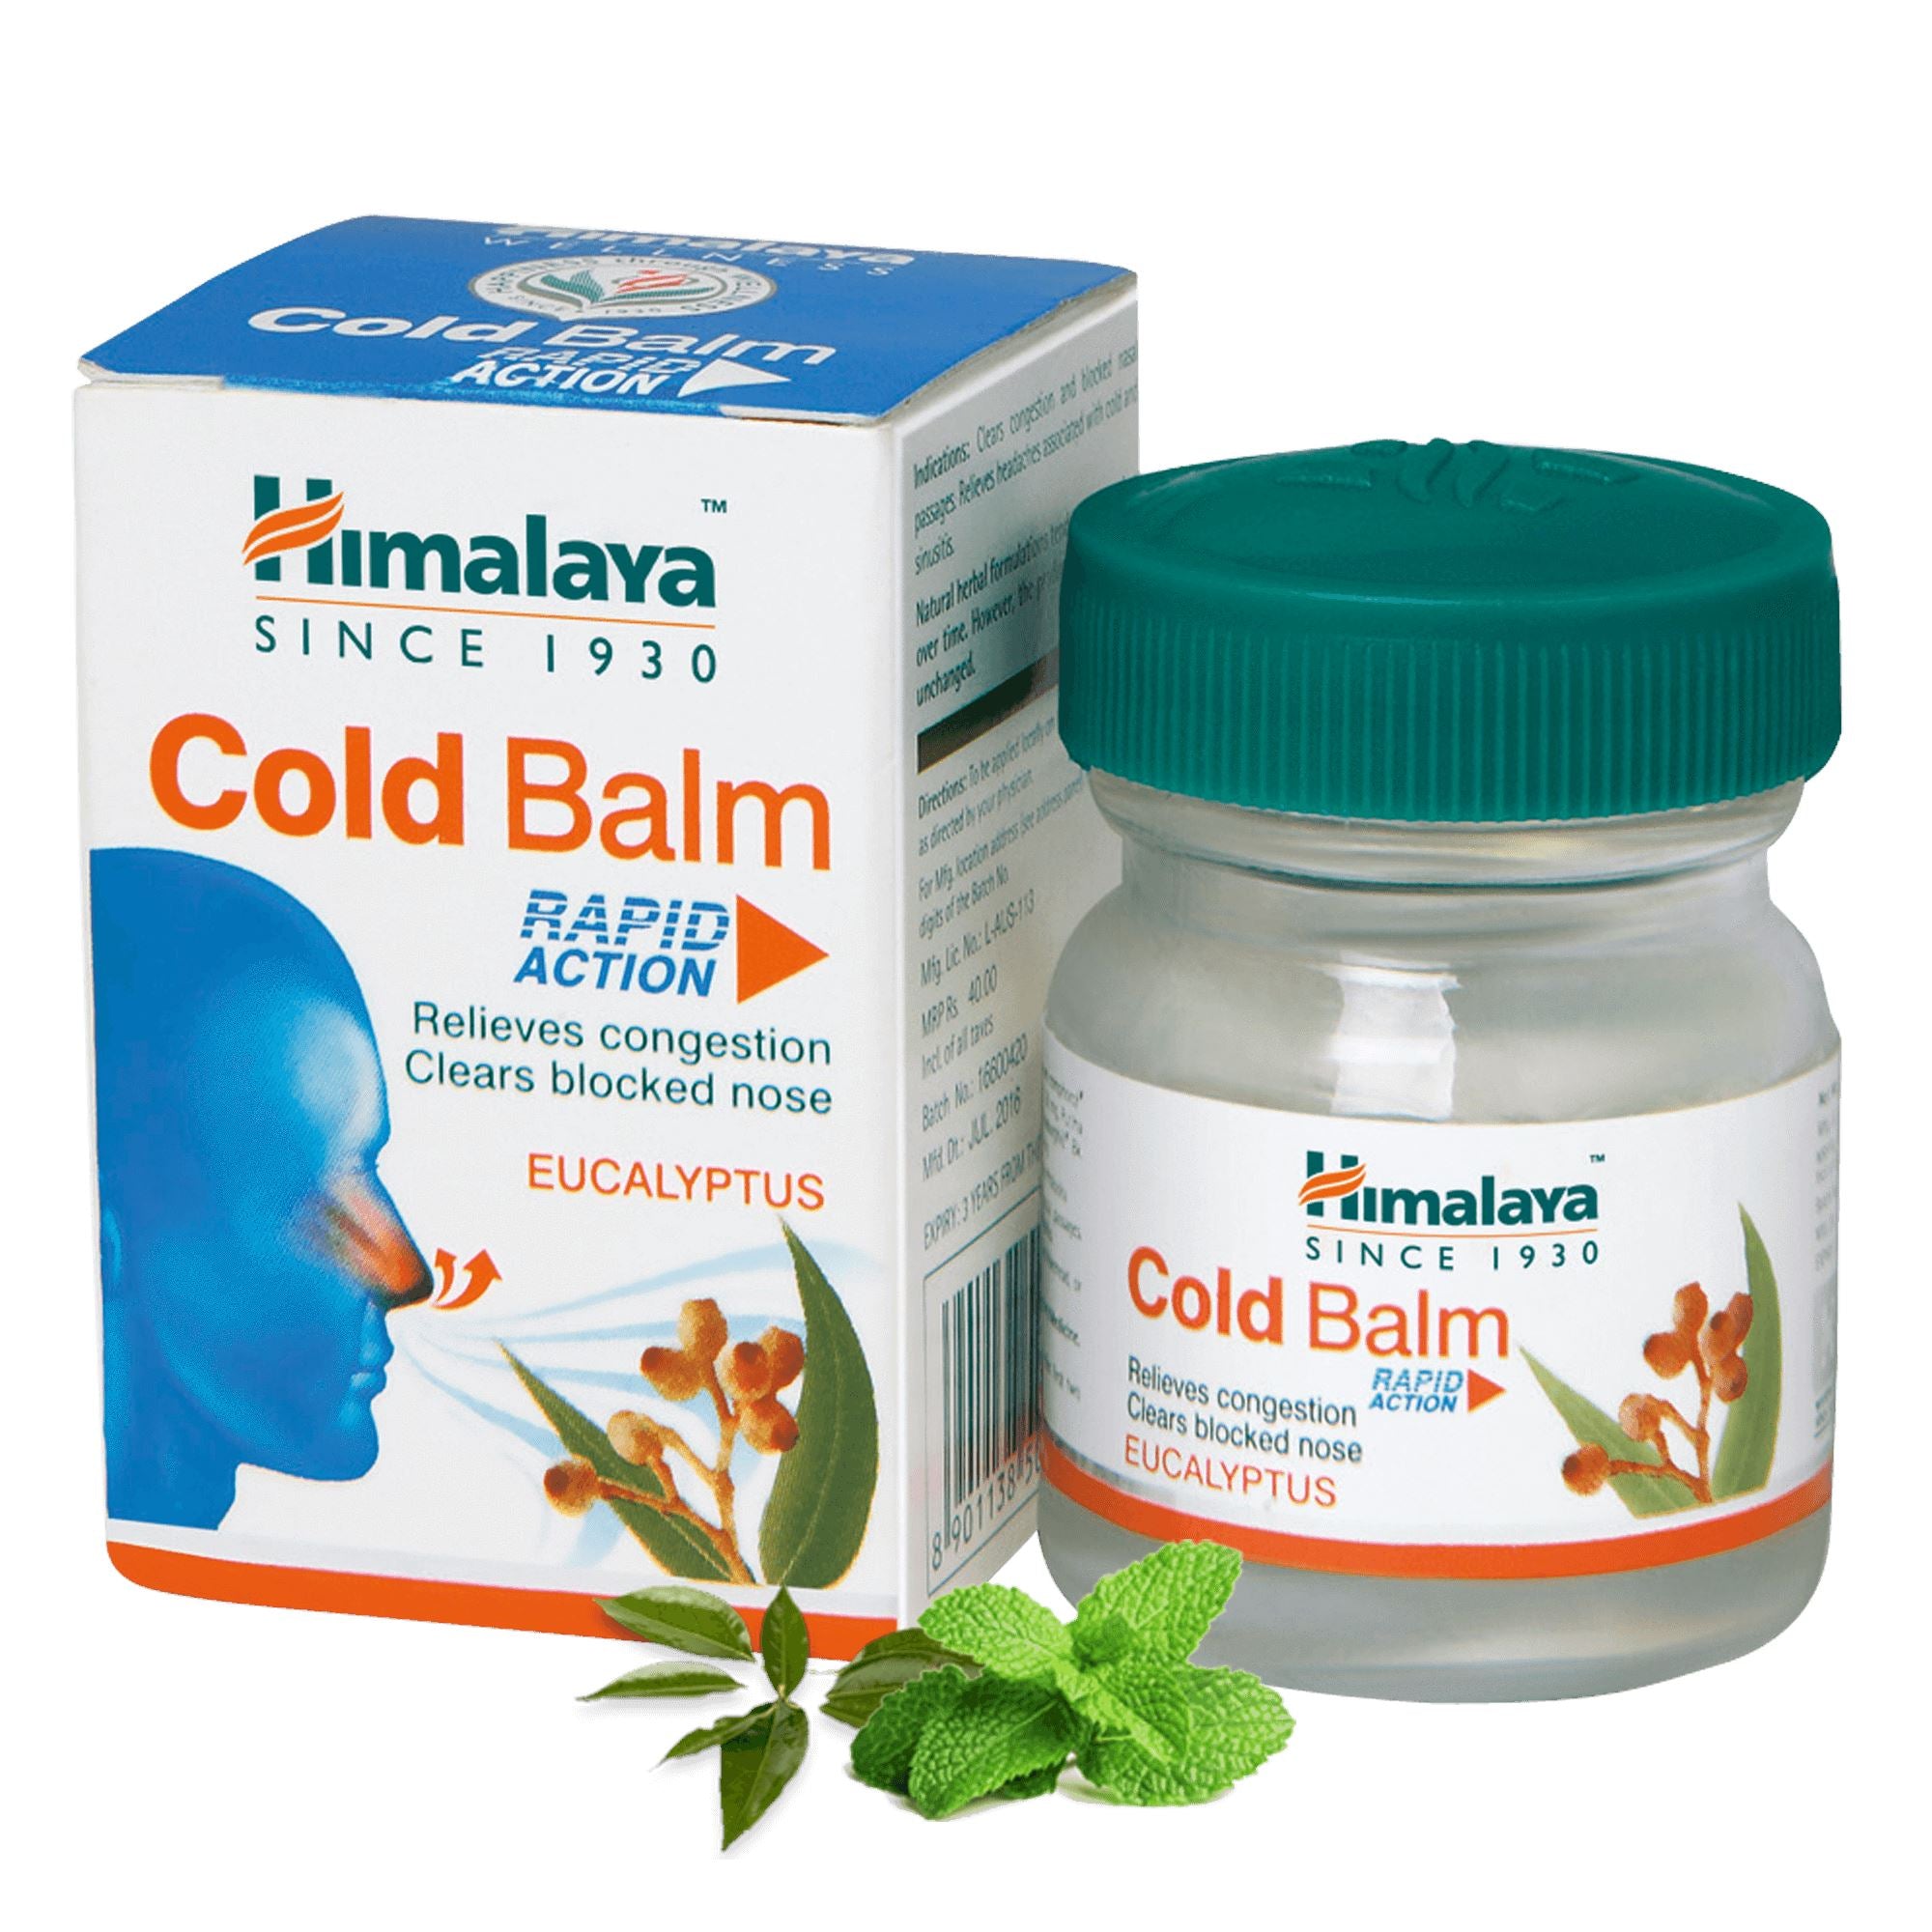 Himalaya Cold Balm - Relieves nasal and chest congestion